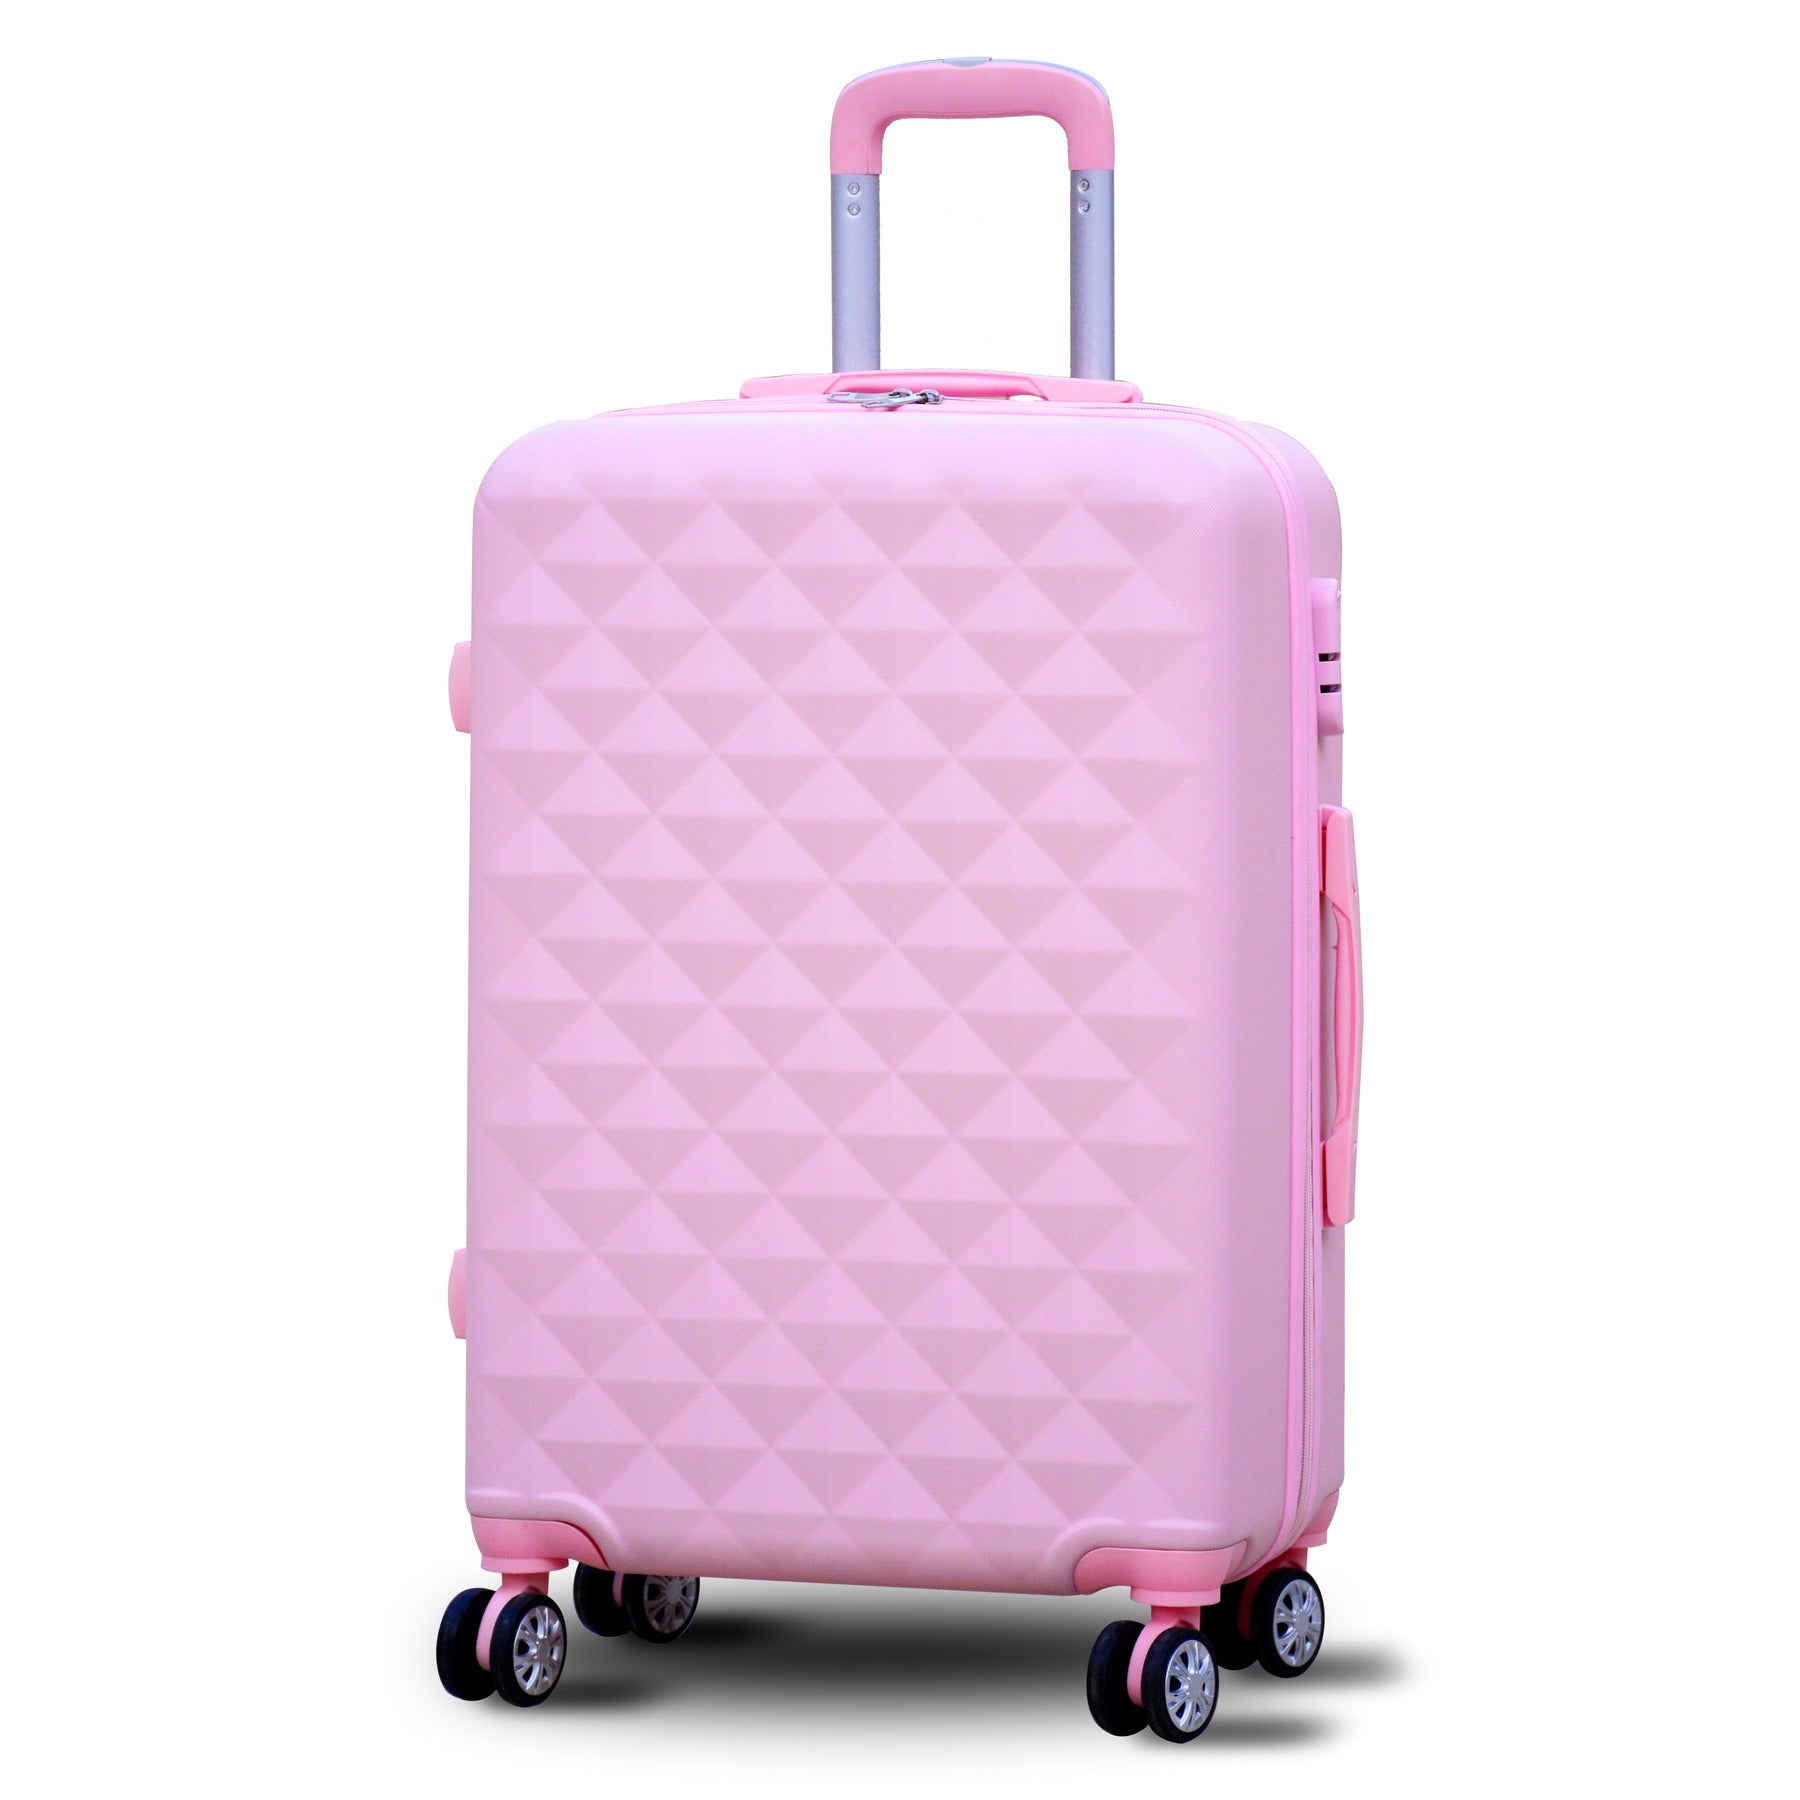 28" Pink Colour Diamond Cut ABS Lightweight Luggage Bag With Spinner Wheel